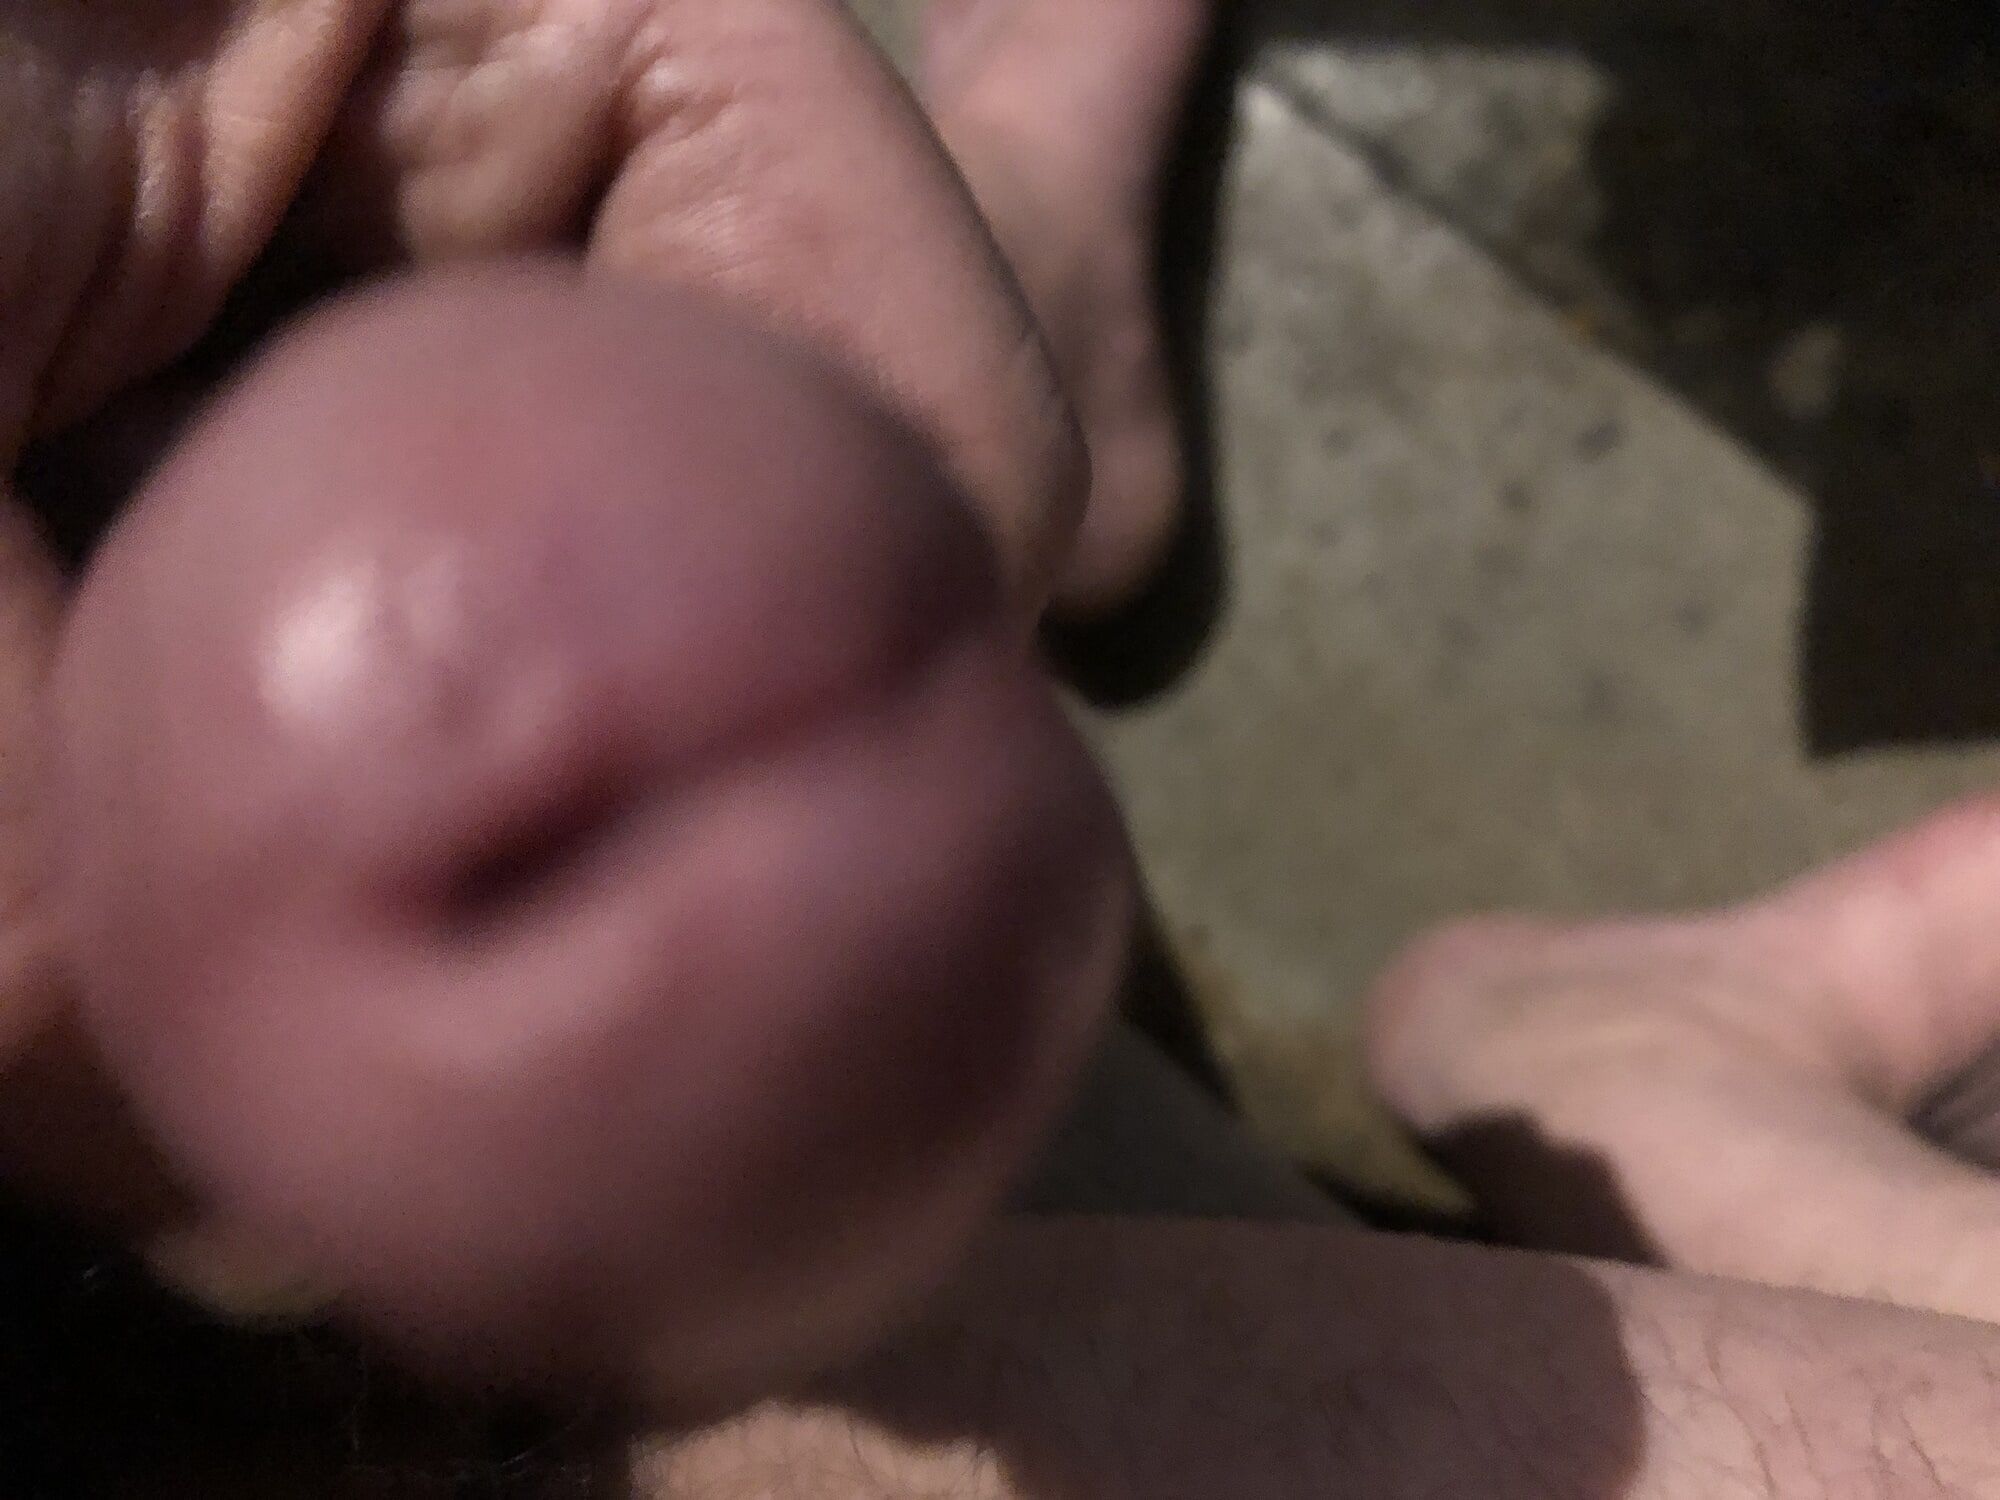 Other shots of my cock